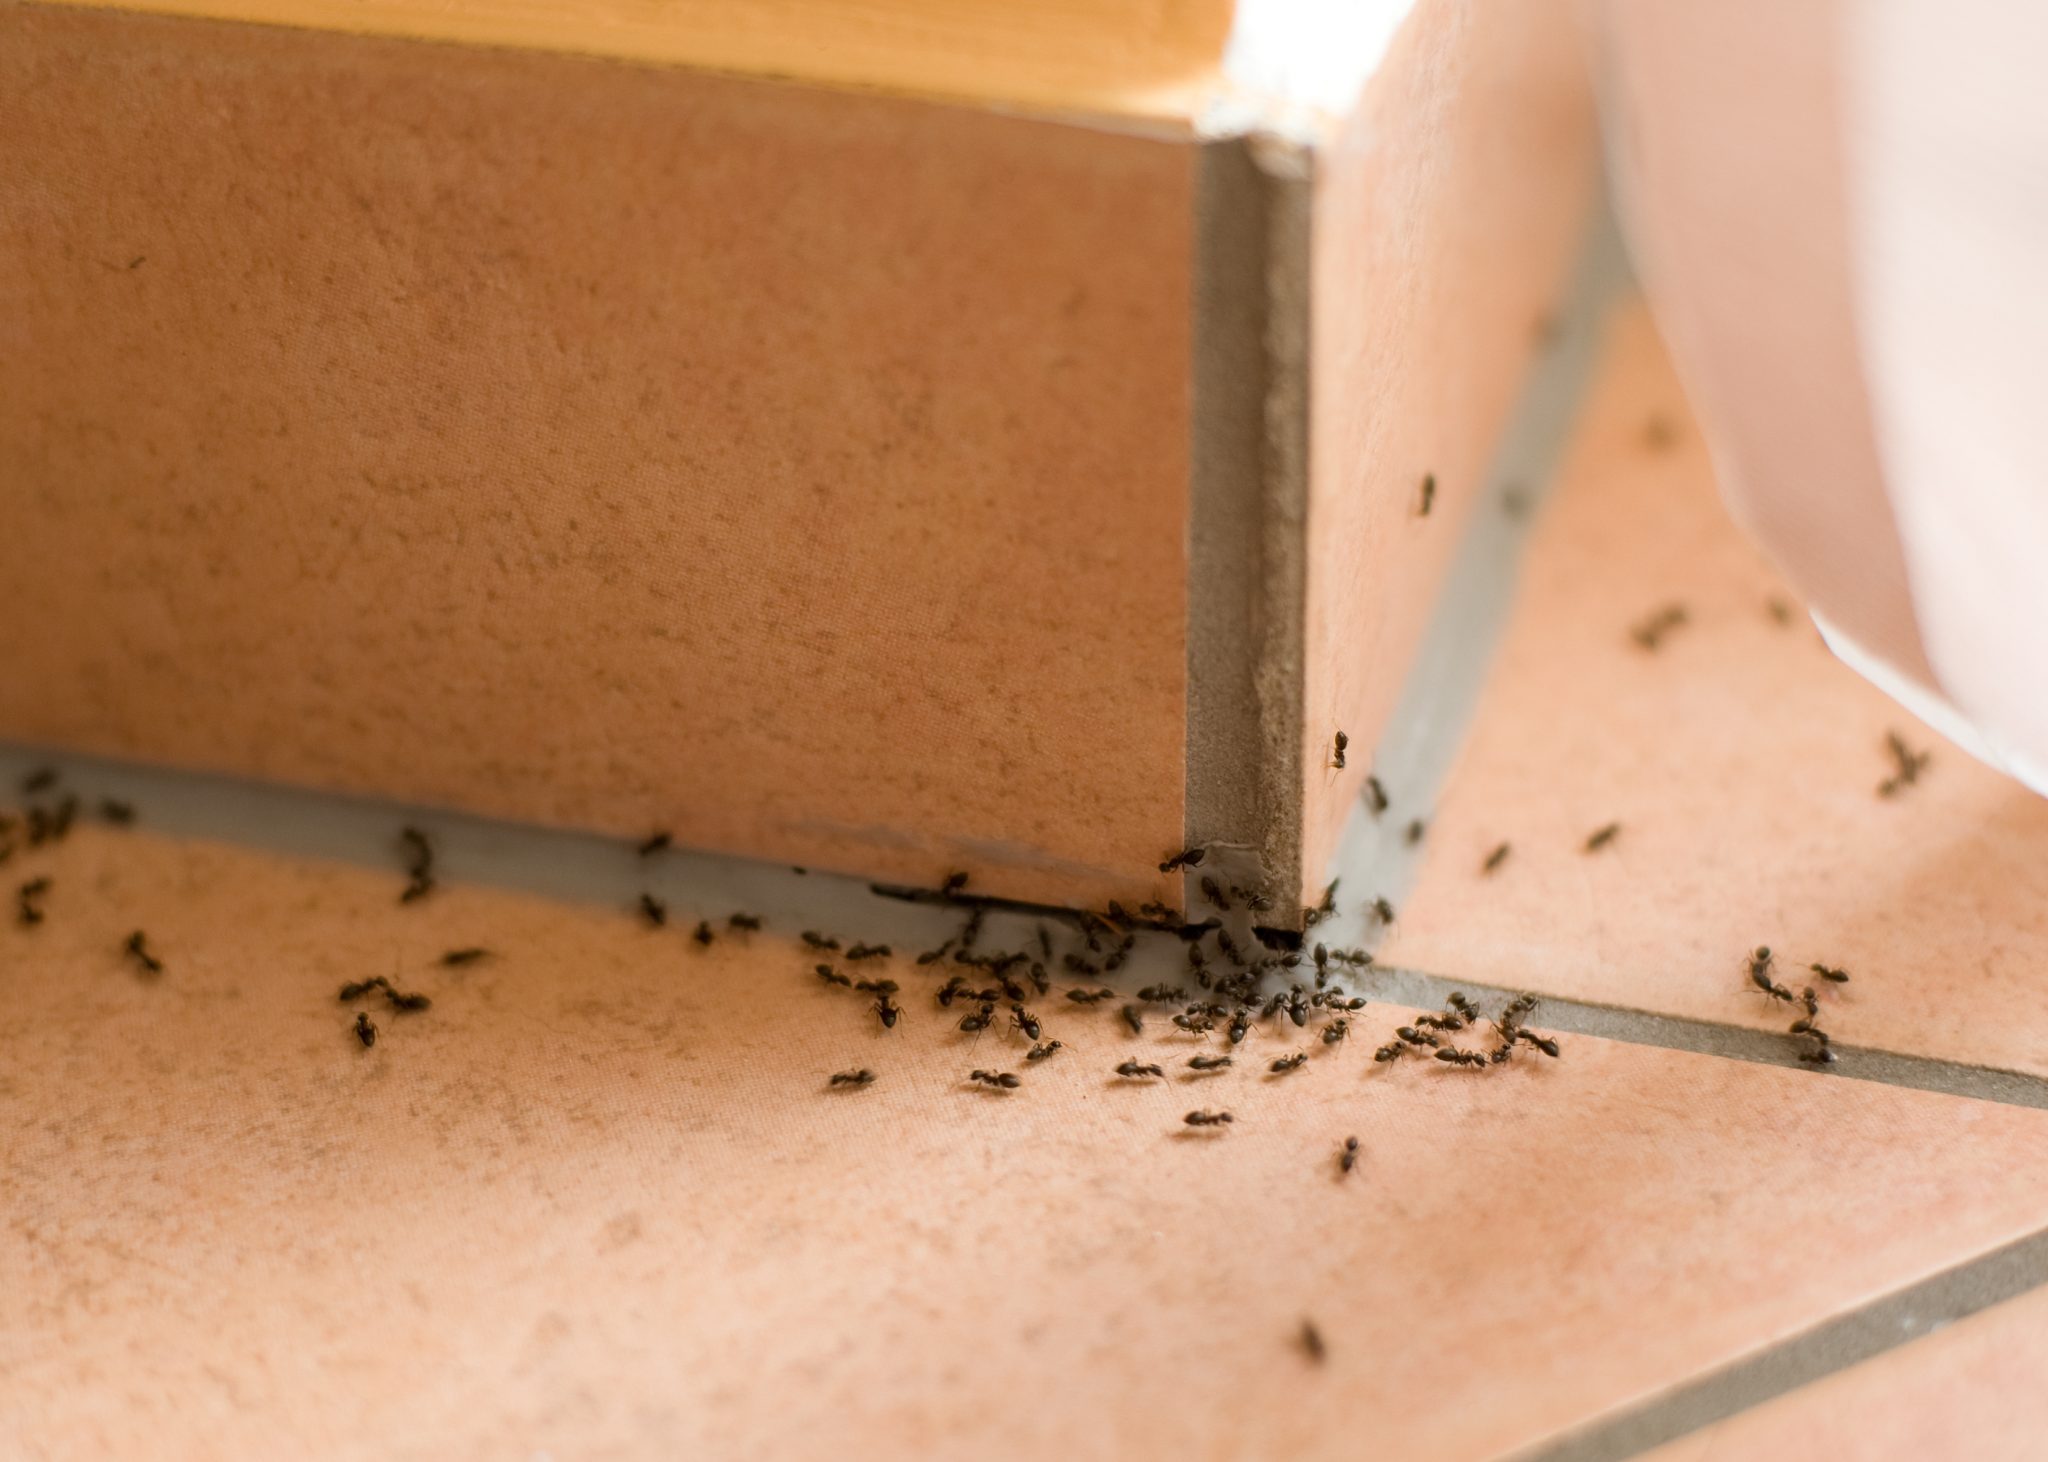 Ant Infestations - How Quick Home Remedies Can Make Your Problem Worse